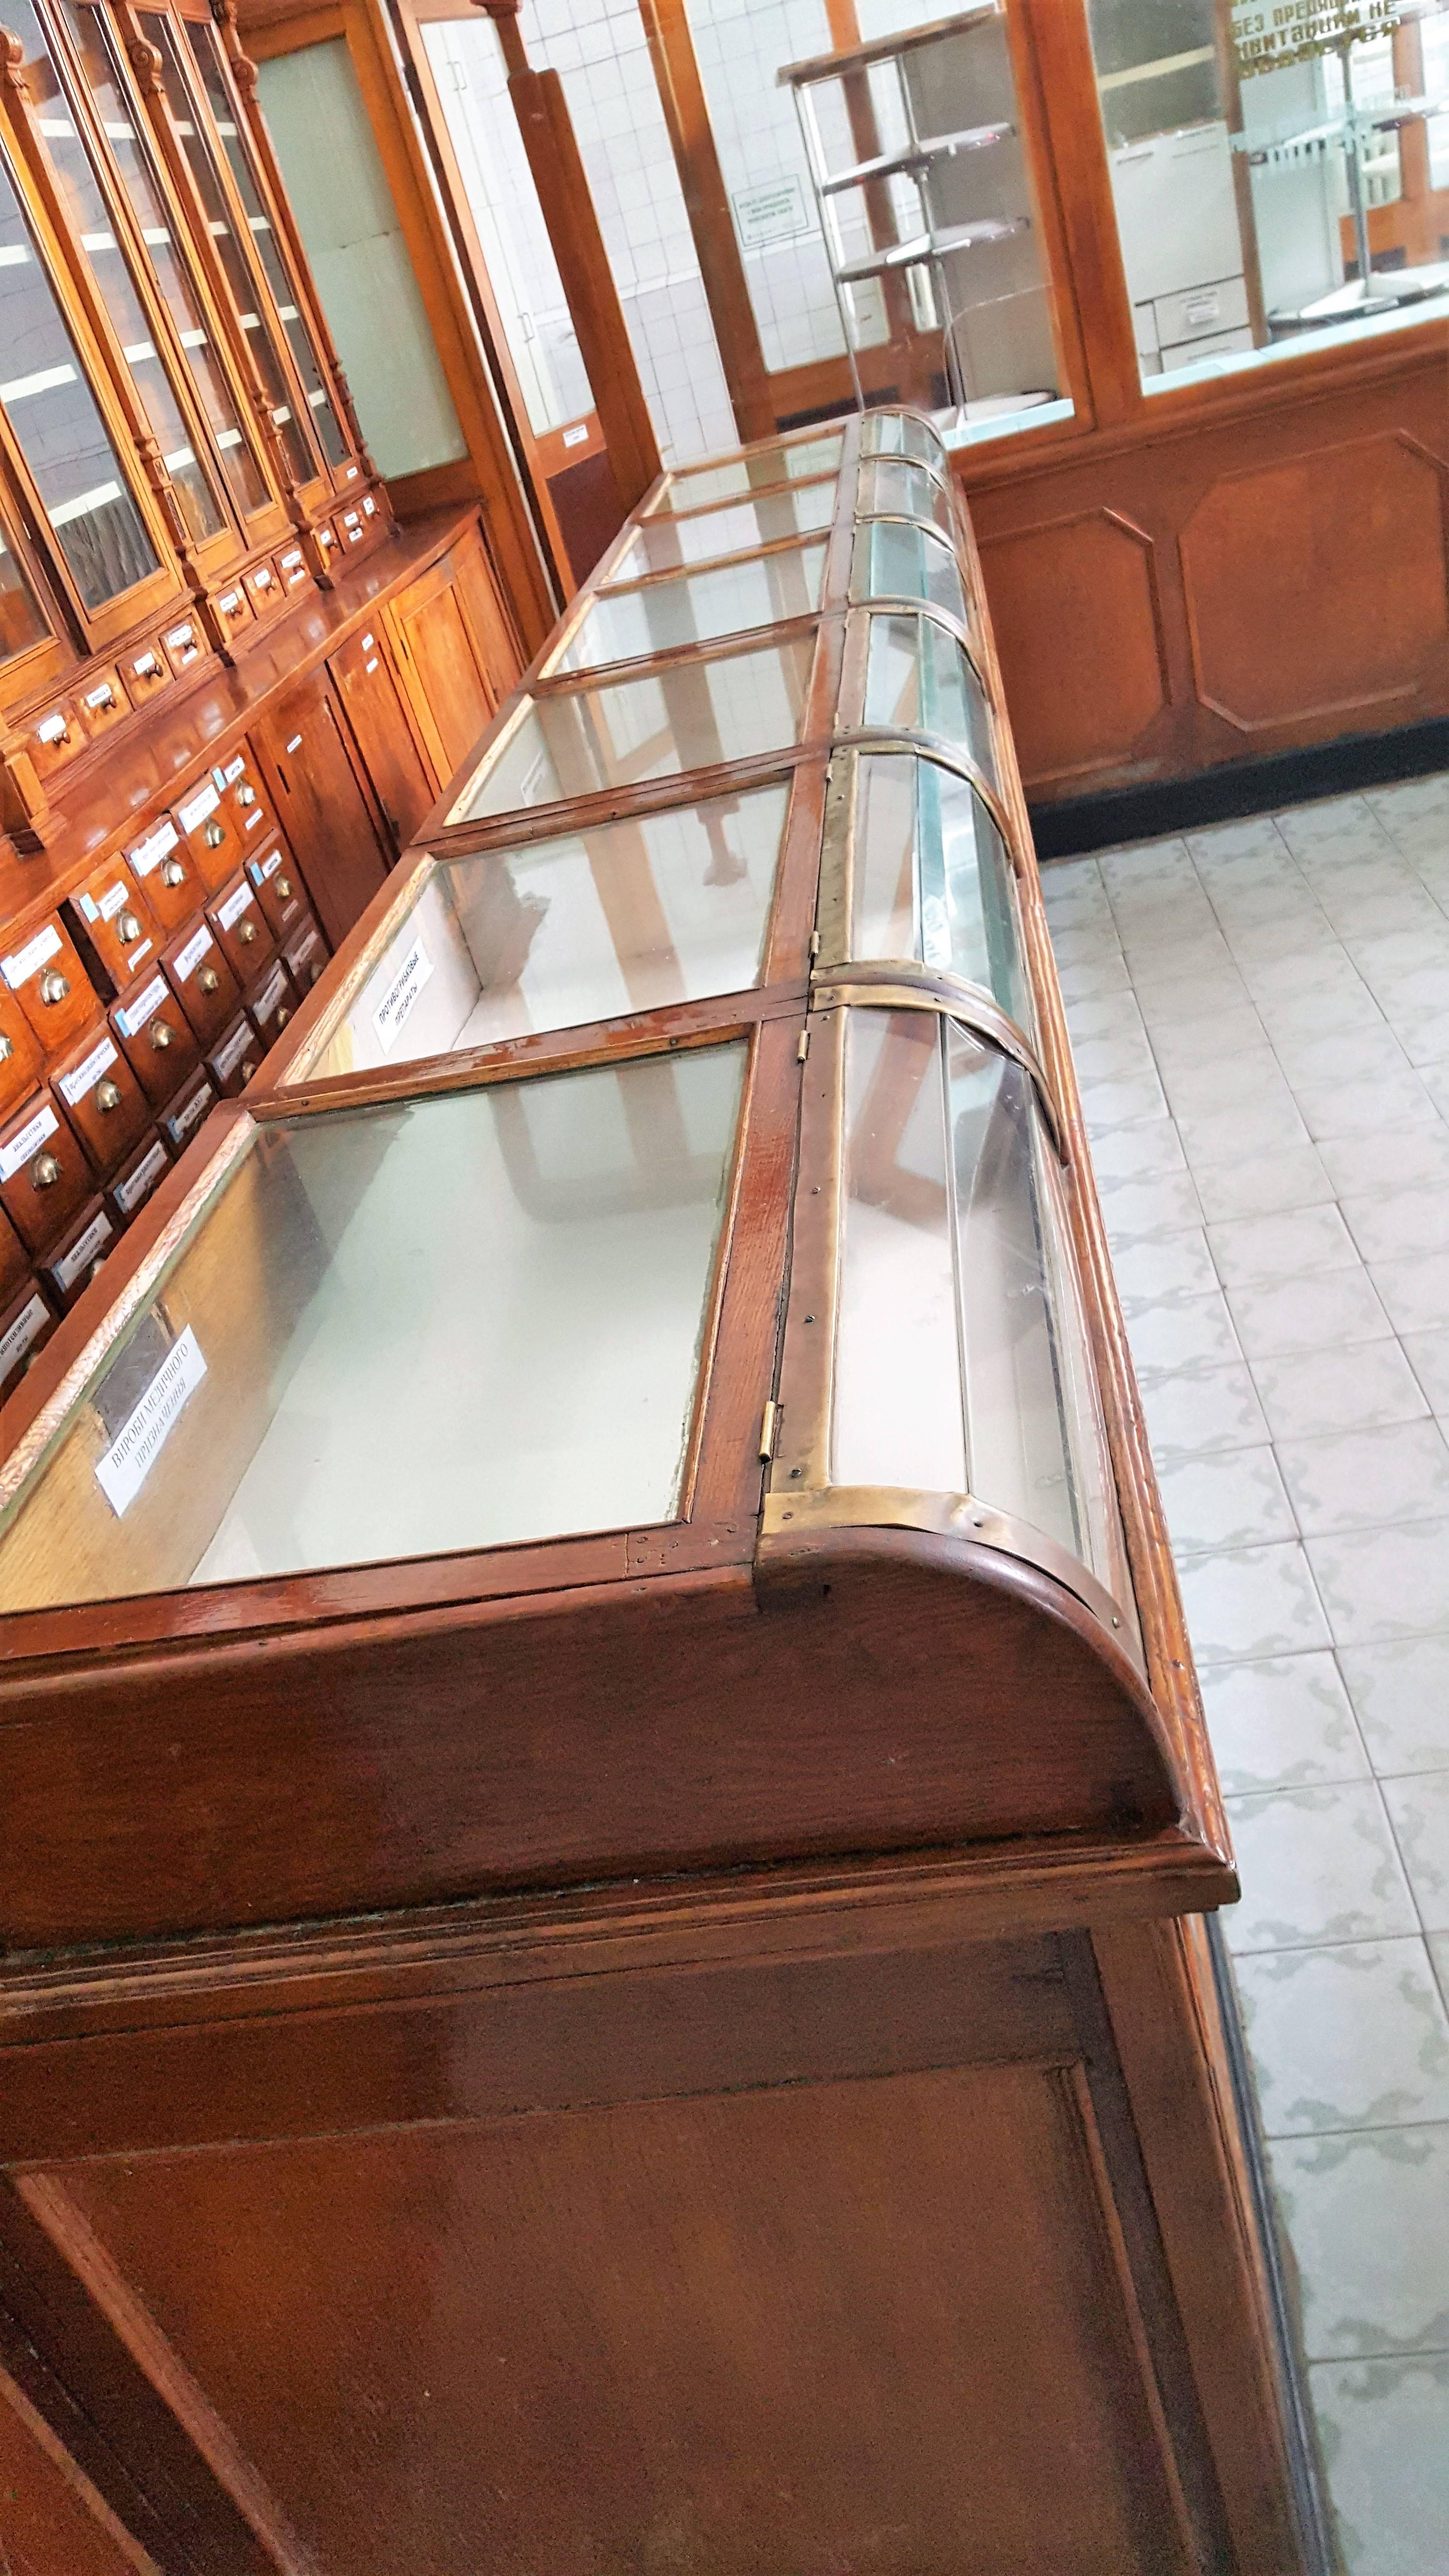 Up for sale is an absolutly stunning complete interior of an 19th century Russian chemist shop.

The collection is made from oak, pinewood and glass and consists of:

A beautifully finished main storage cabinet with five double door storage